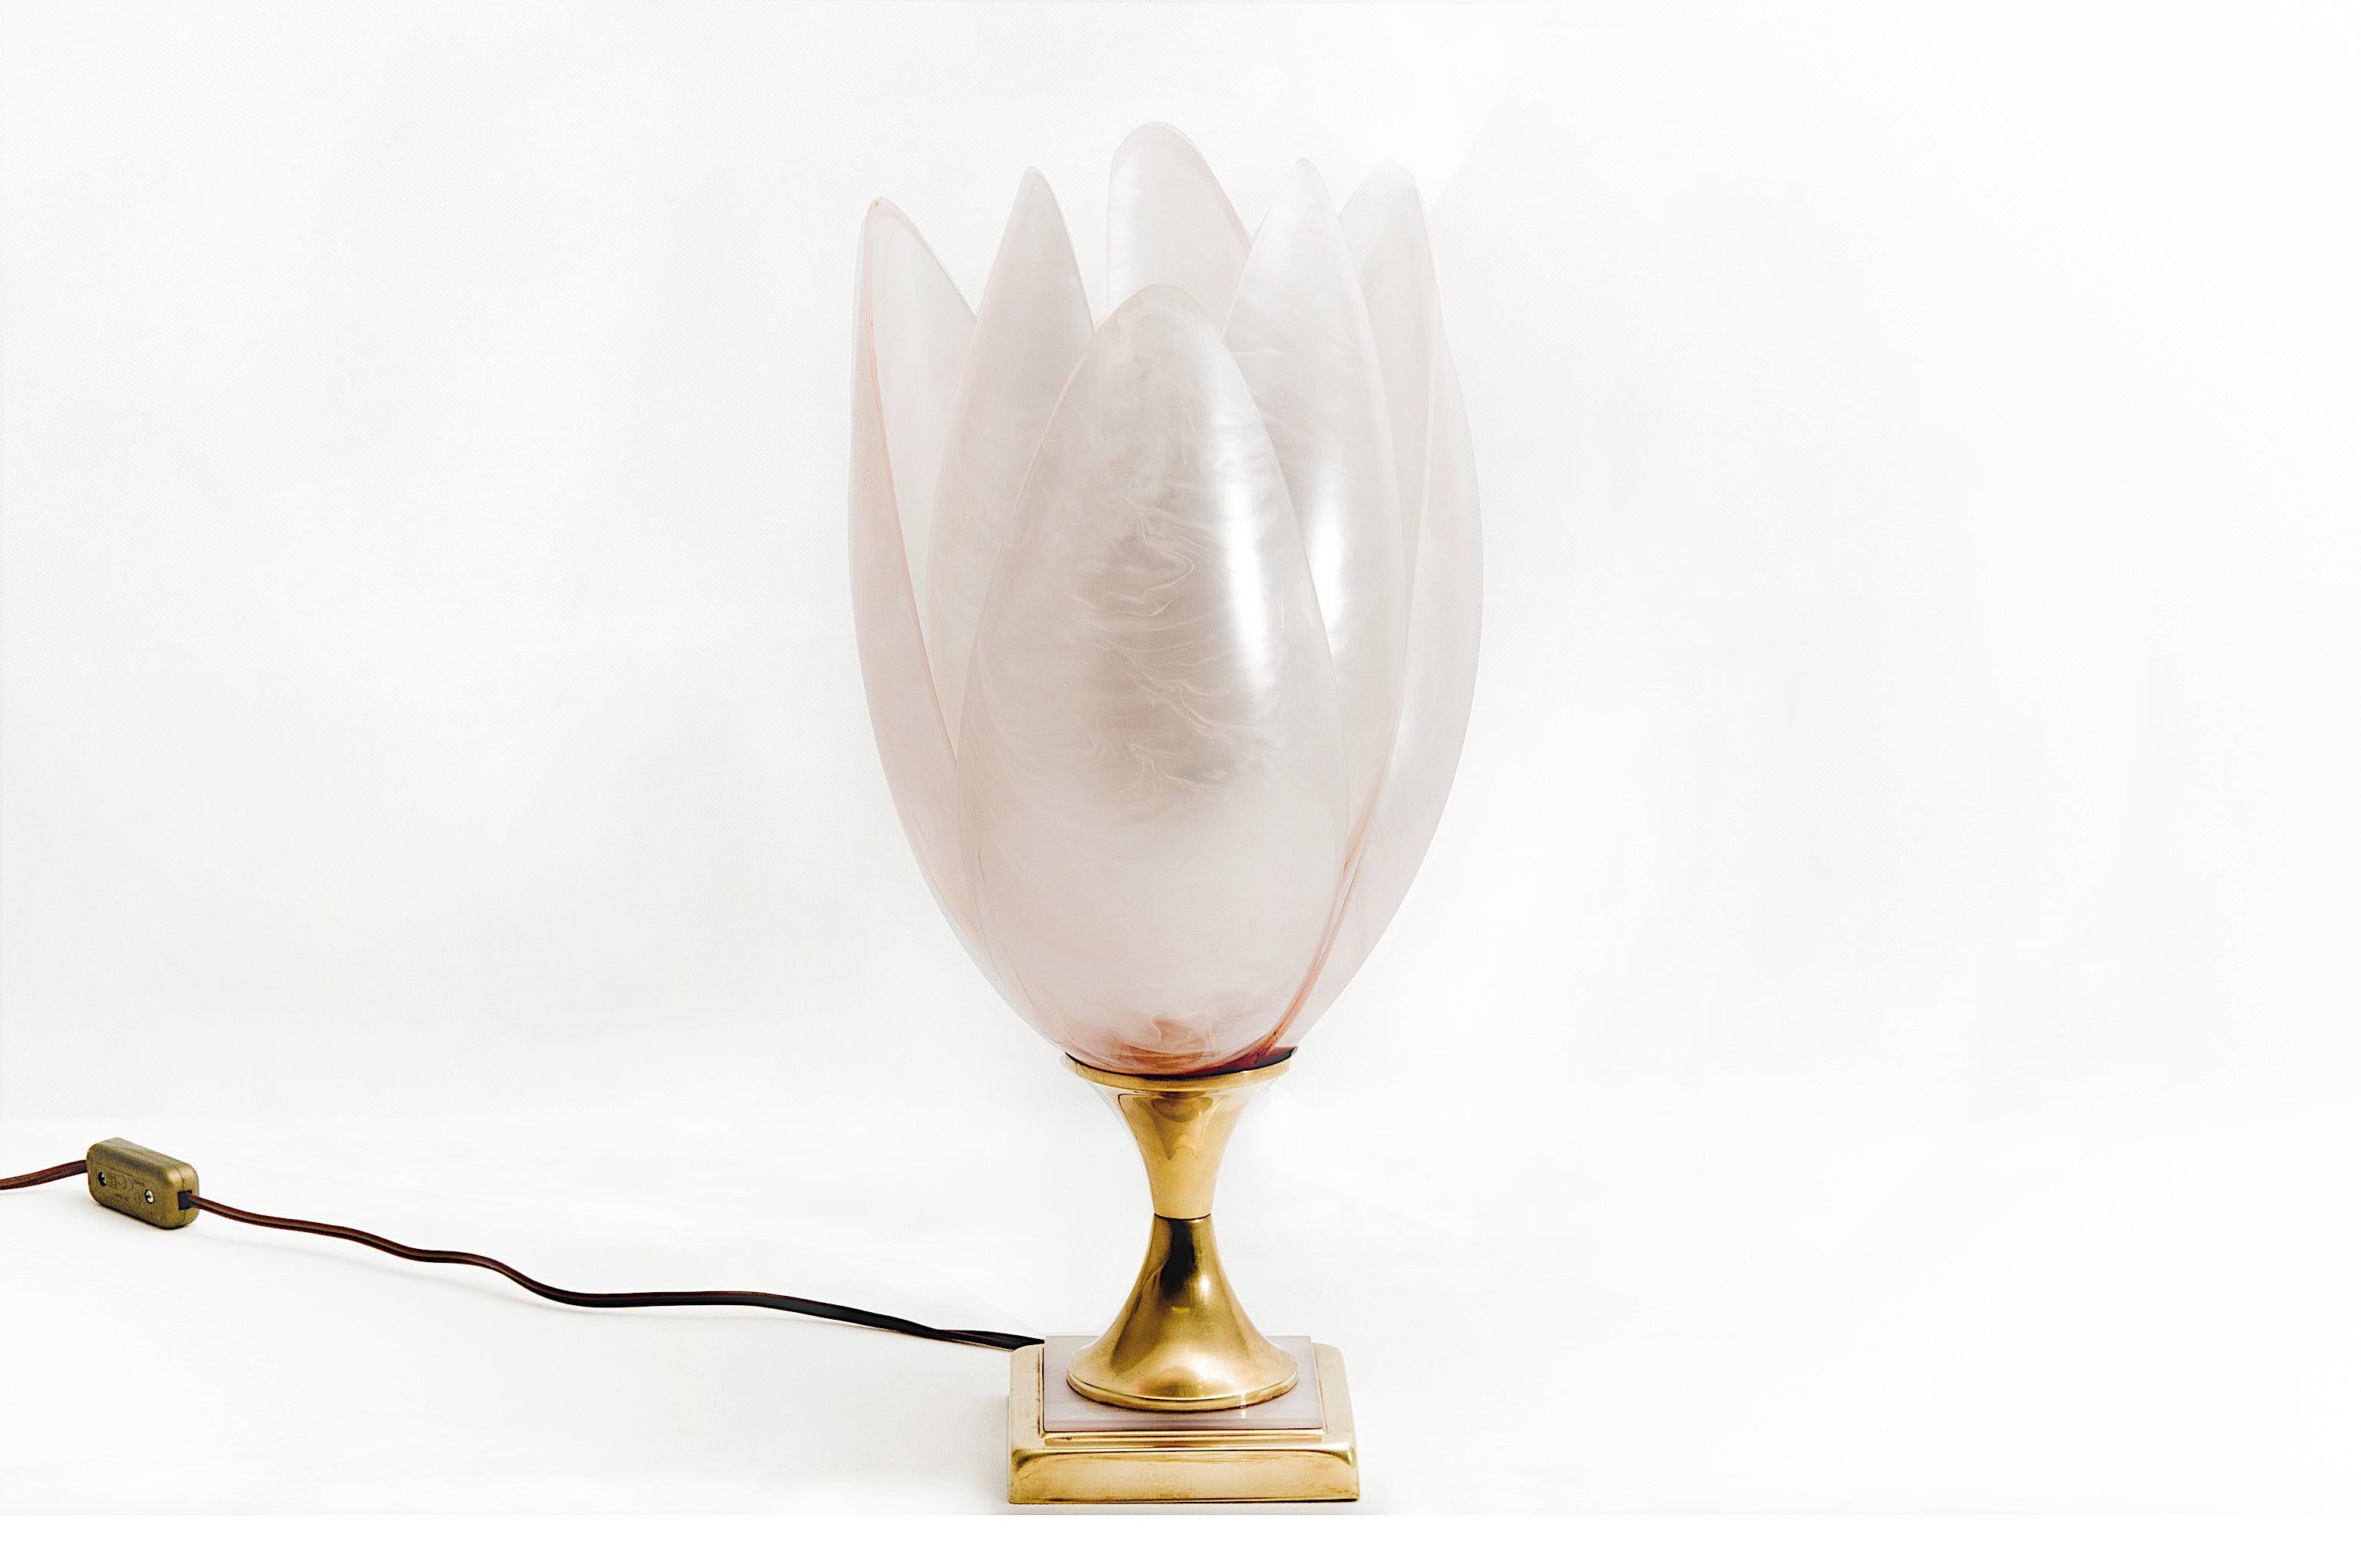 Brass Flower Table Lamp, by Rougier, 6 Petals Model, Pink Color, 1970 France, in Resin